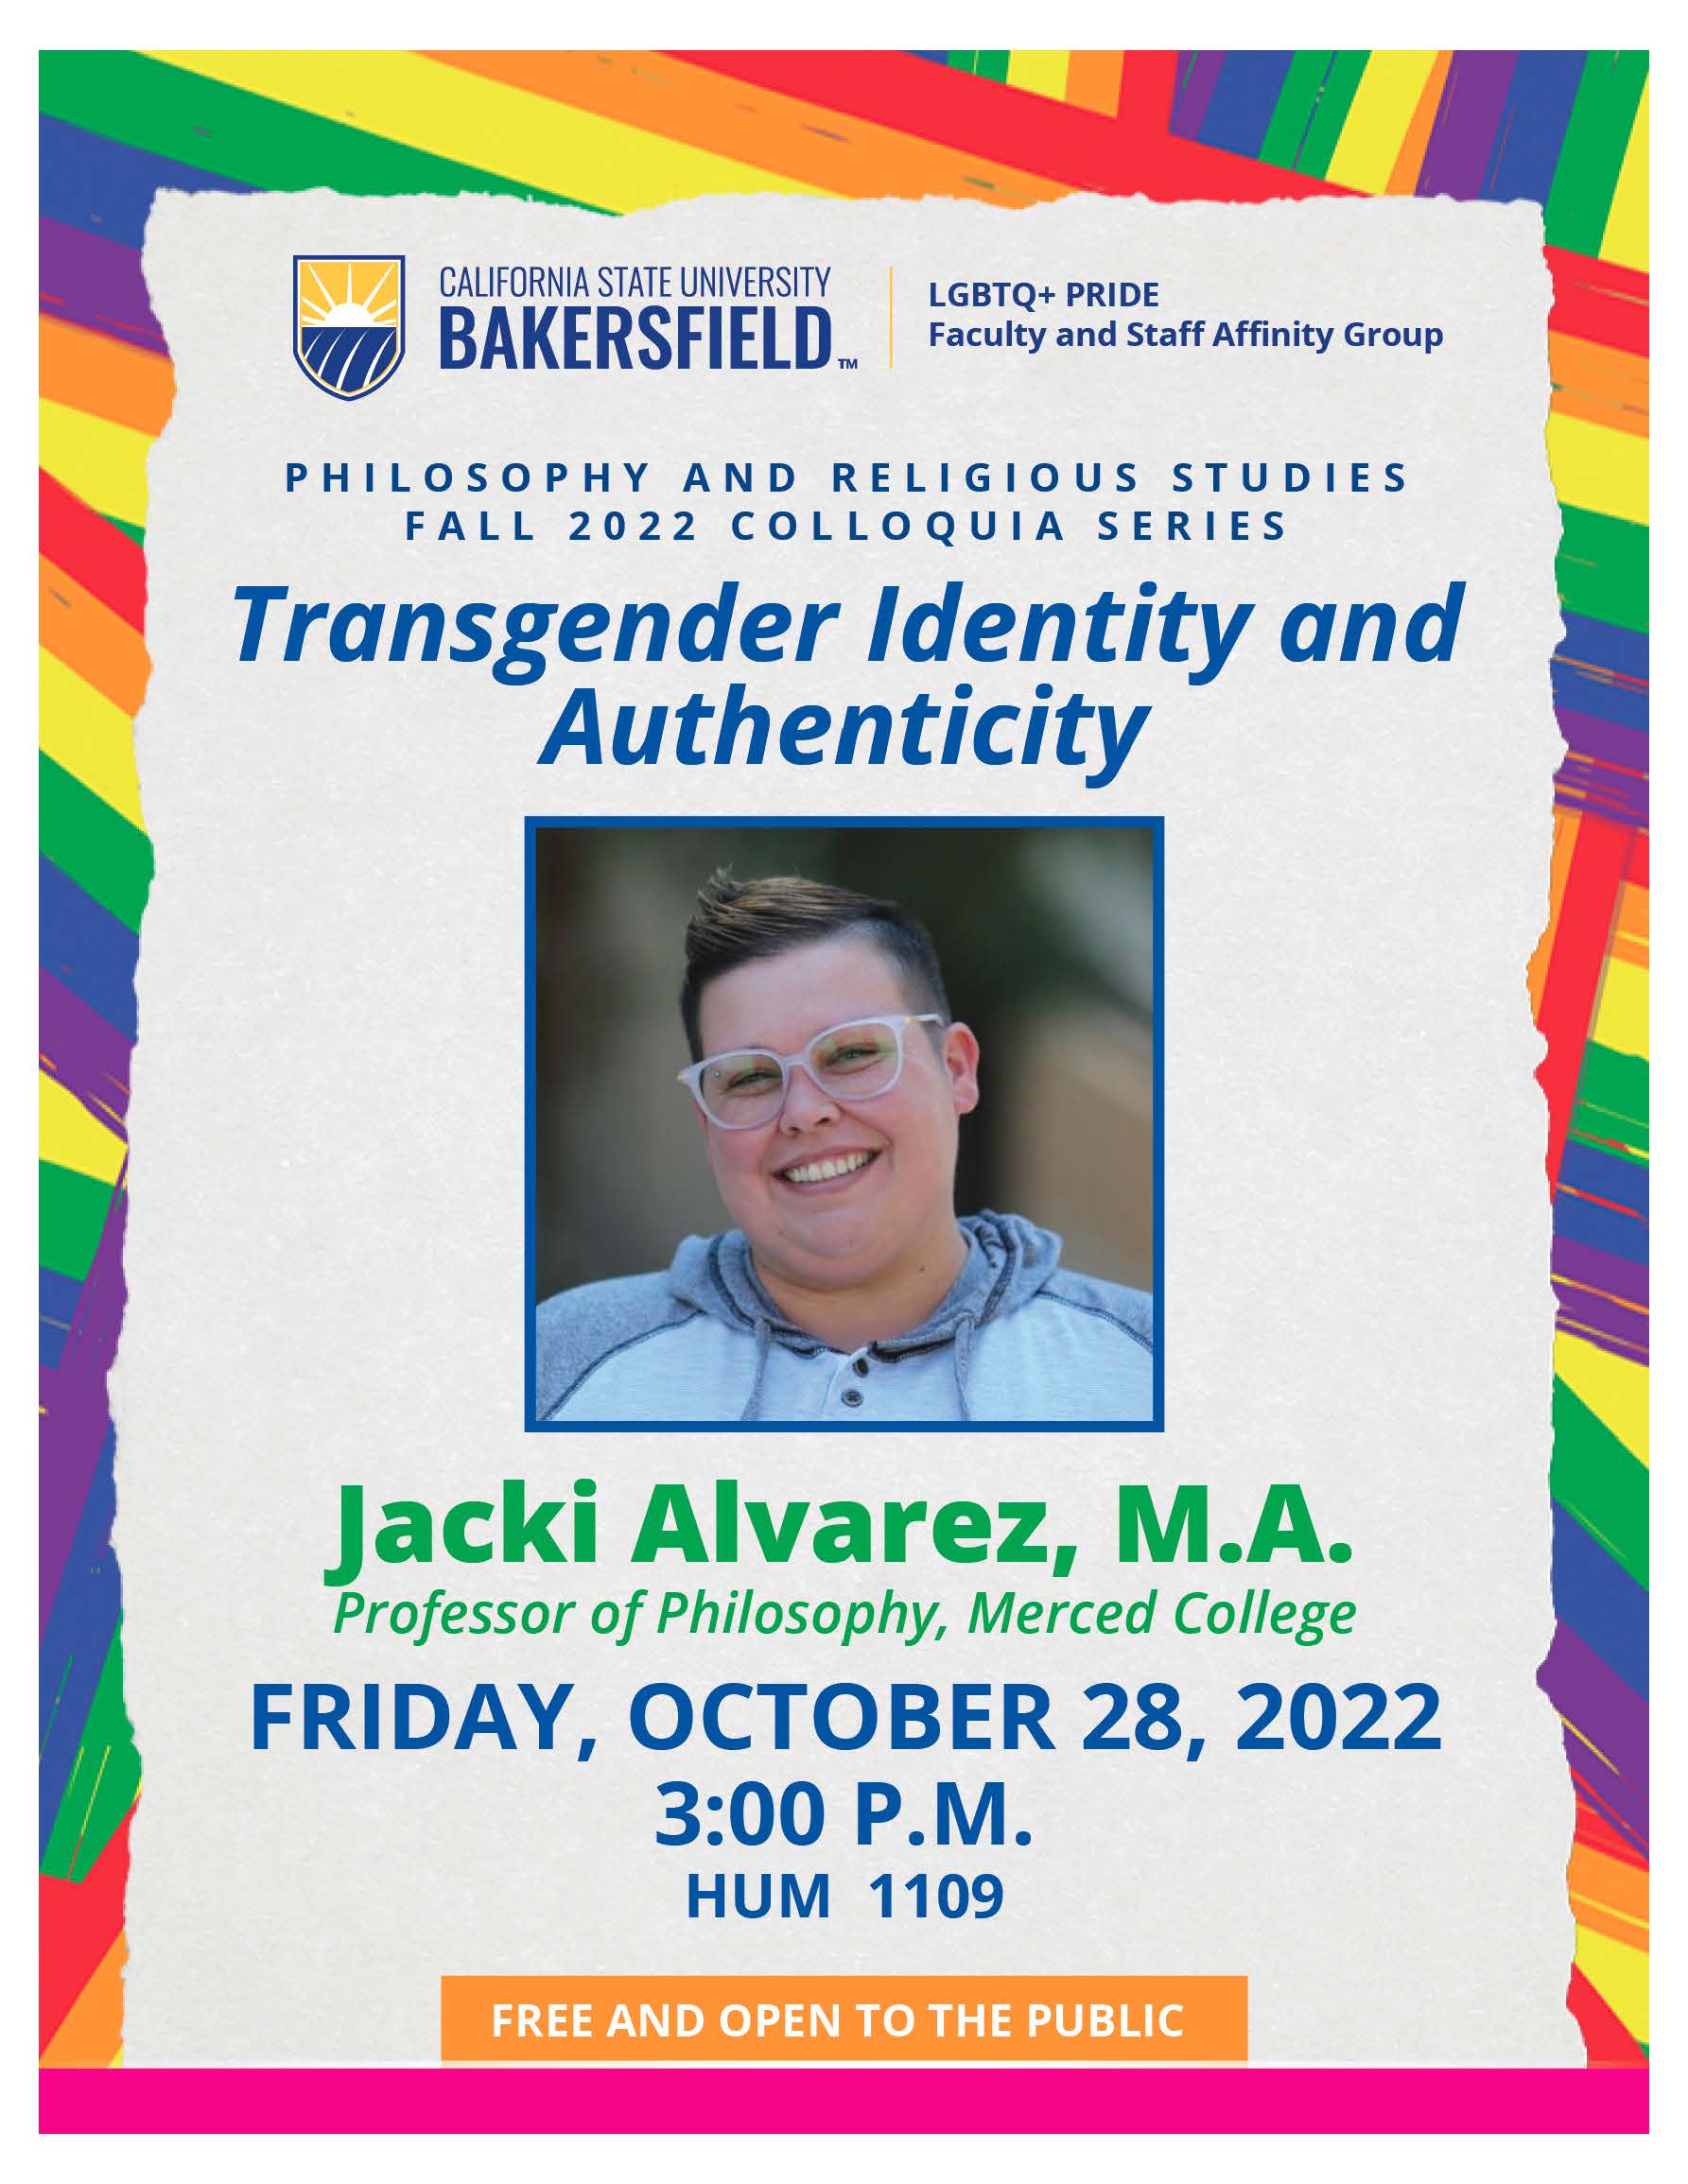 Transgender Identity and Authenticity flyer